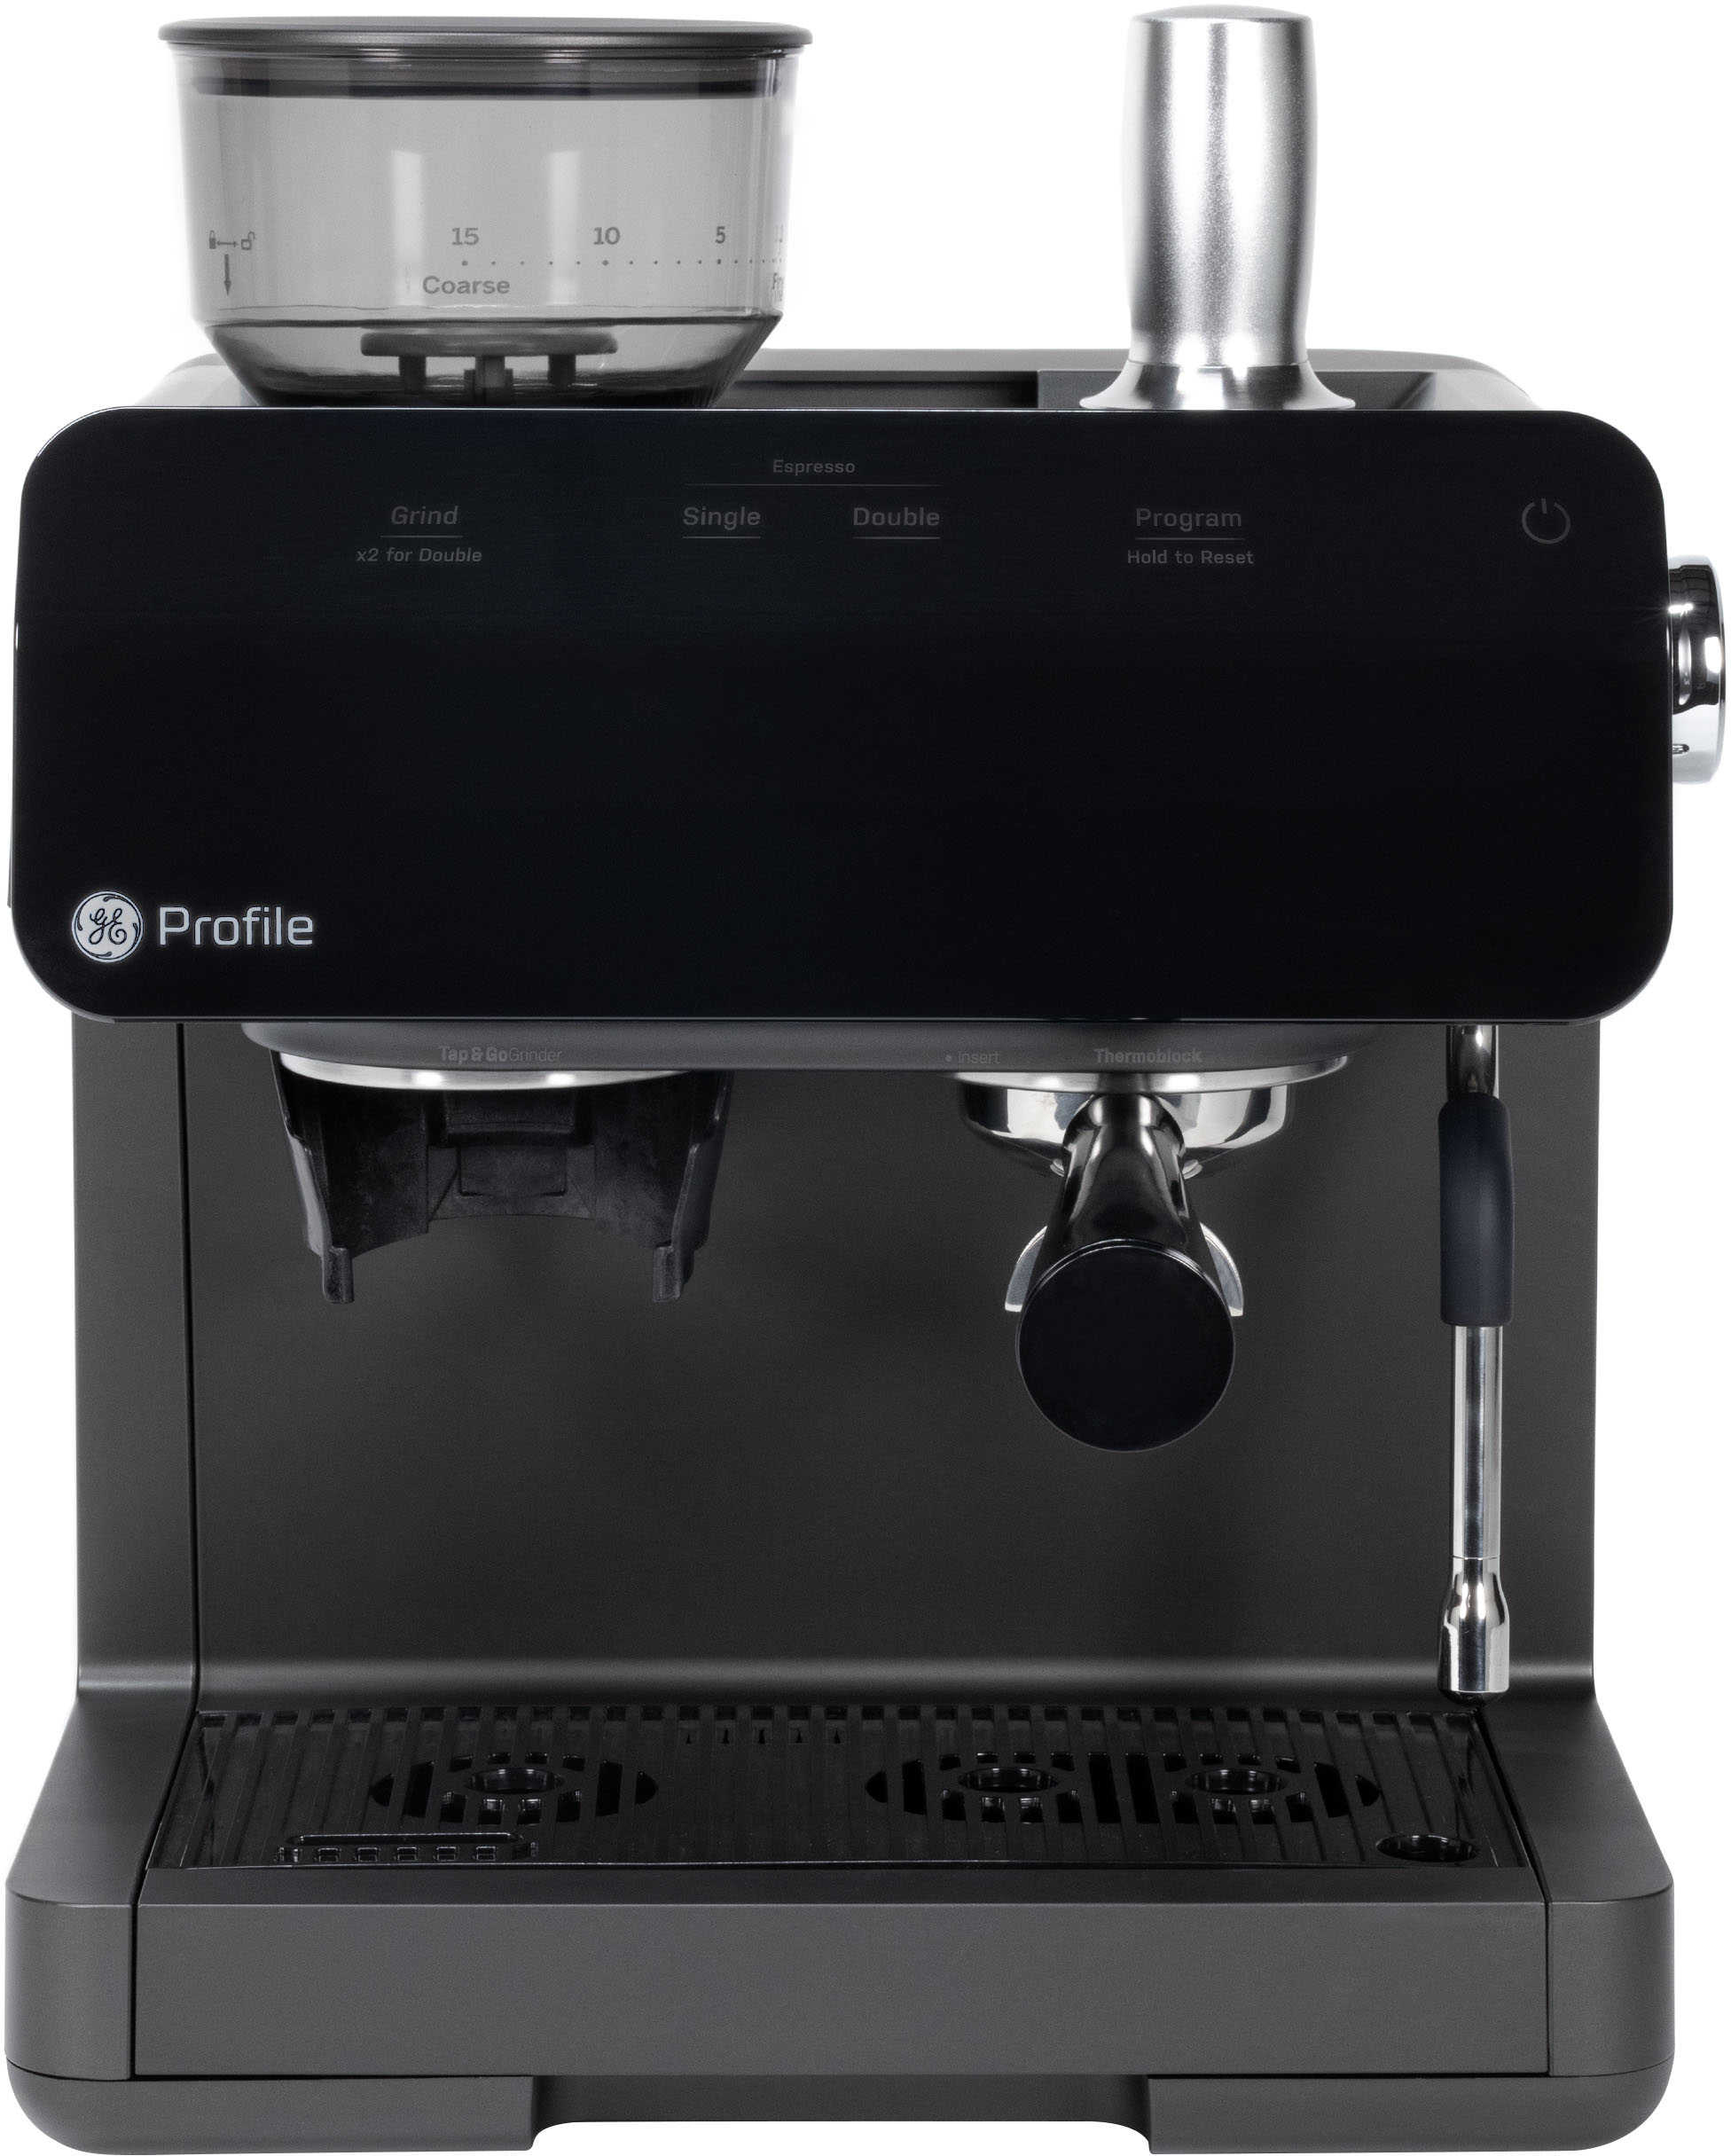 ego Compliment heel GE Profile Semi-Automatic Espresso Machine with 15 bars of pressure, Milk  Frother, and Built-In Wi-Fi Black P7CESAS6RBB - Best Buy